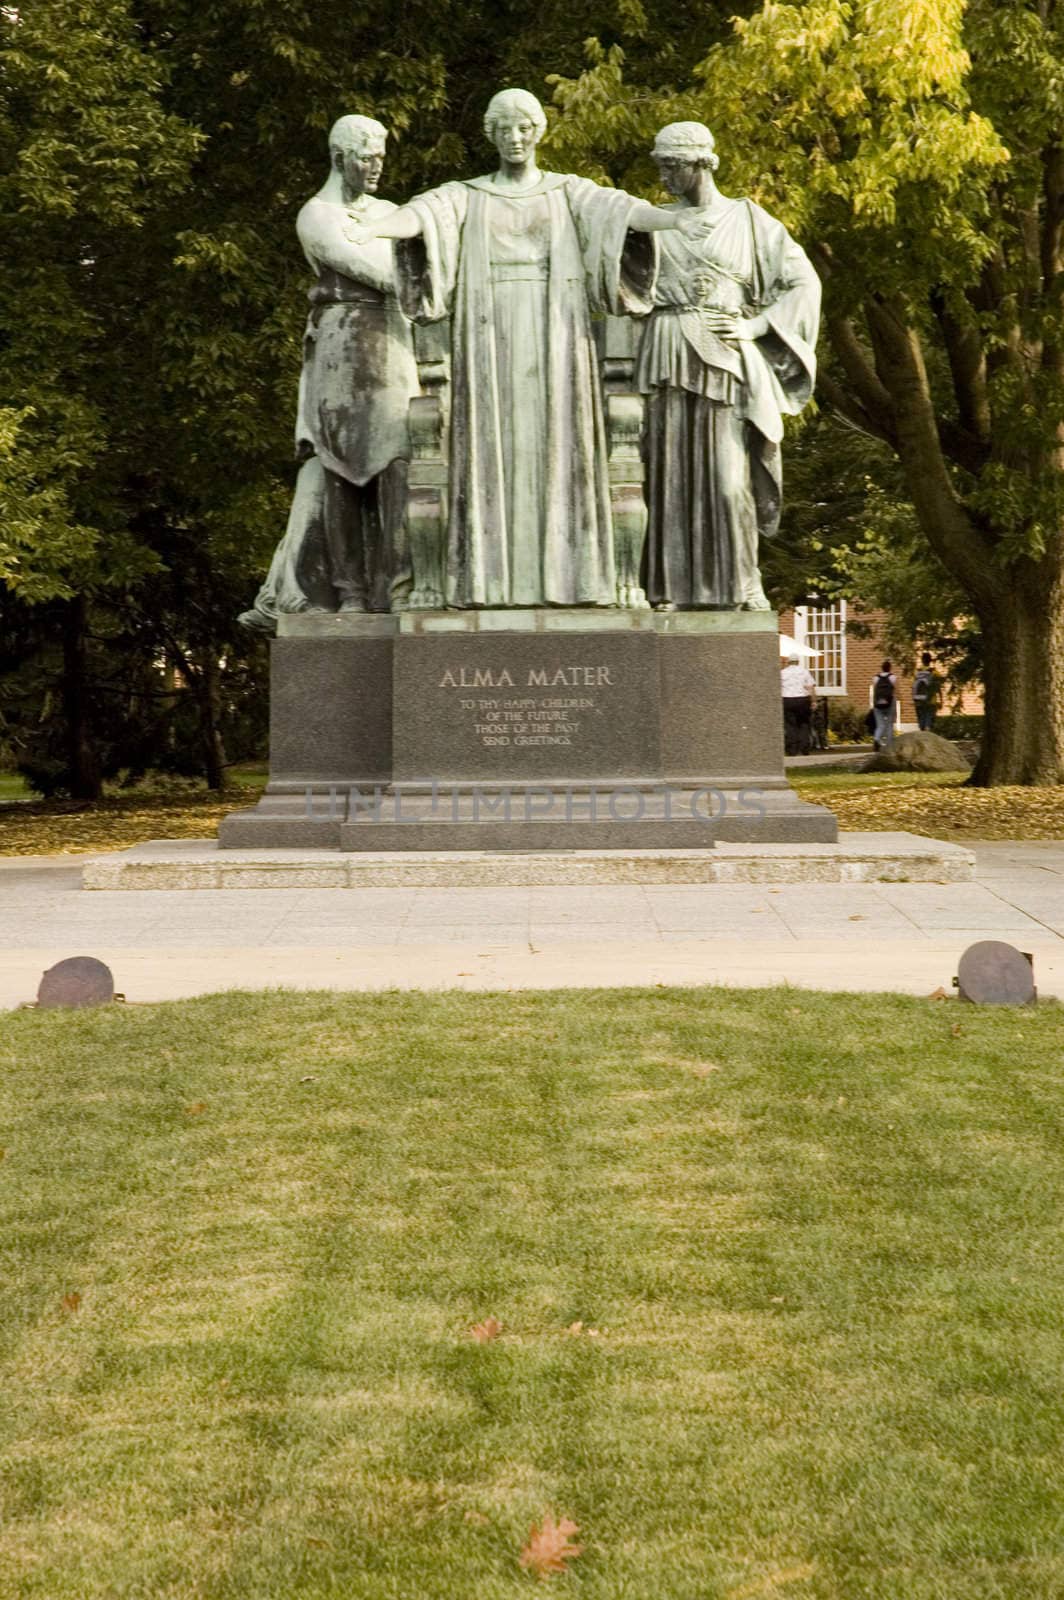 The Alma Mater for the University of Ilinois in Champaign.